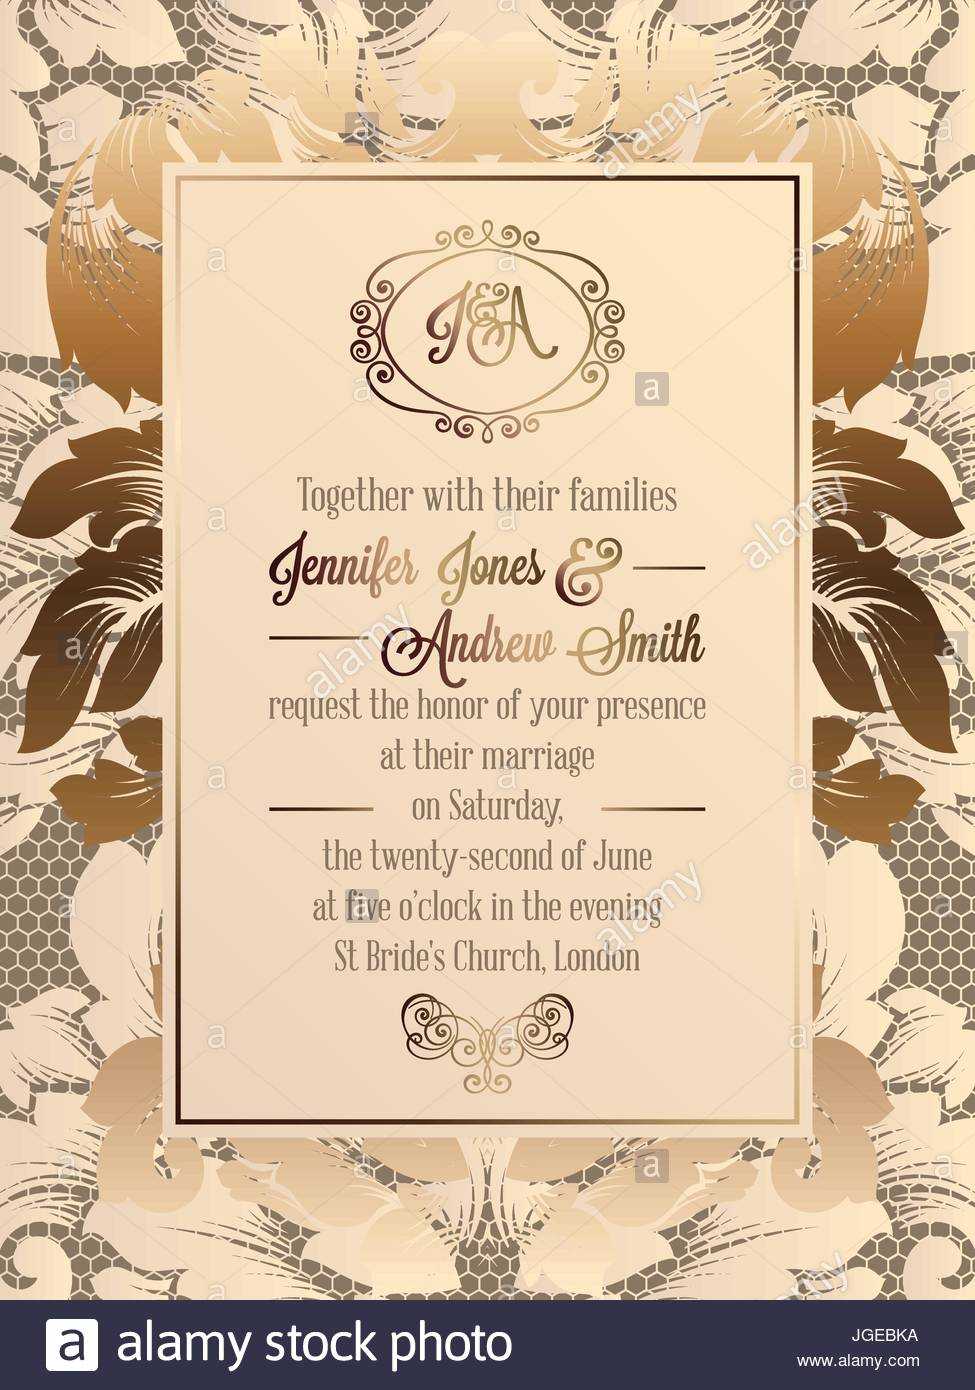 035 Vintage Baroque Style Wedding Invitation Card Template Intended For Church Wedding Invitation Card Template